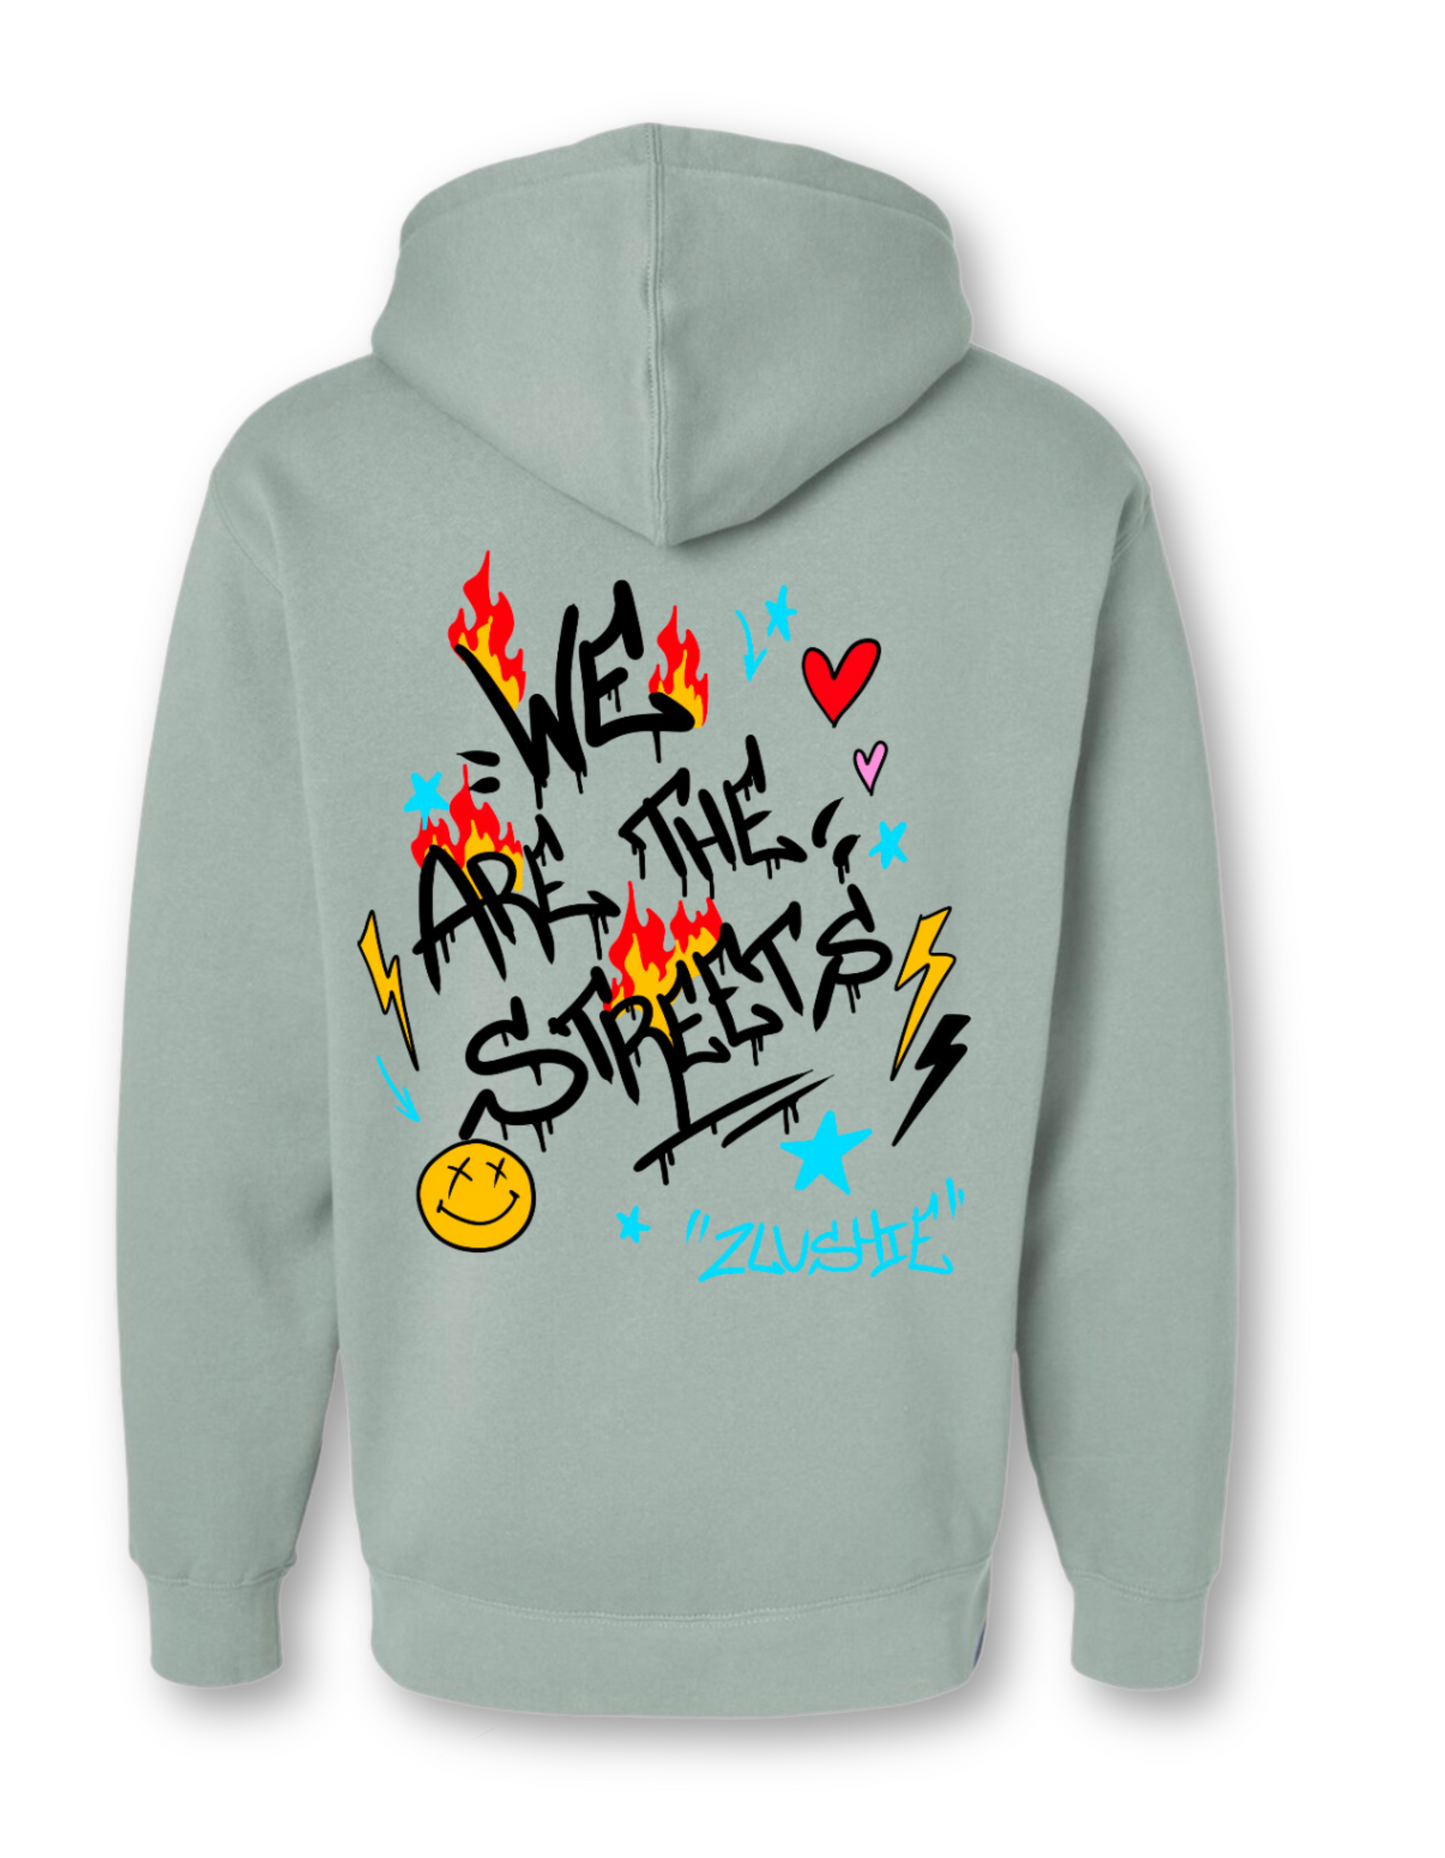 ''We are the Streets'' Hoodies